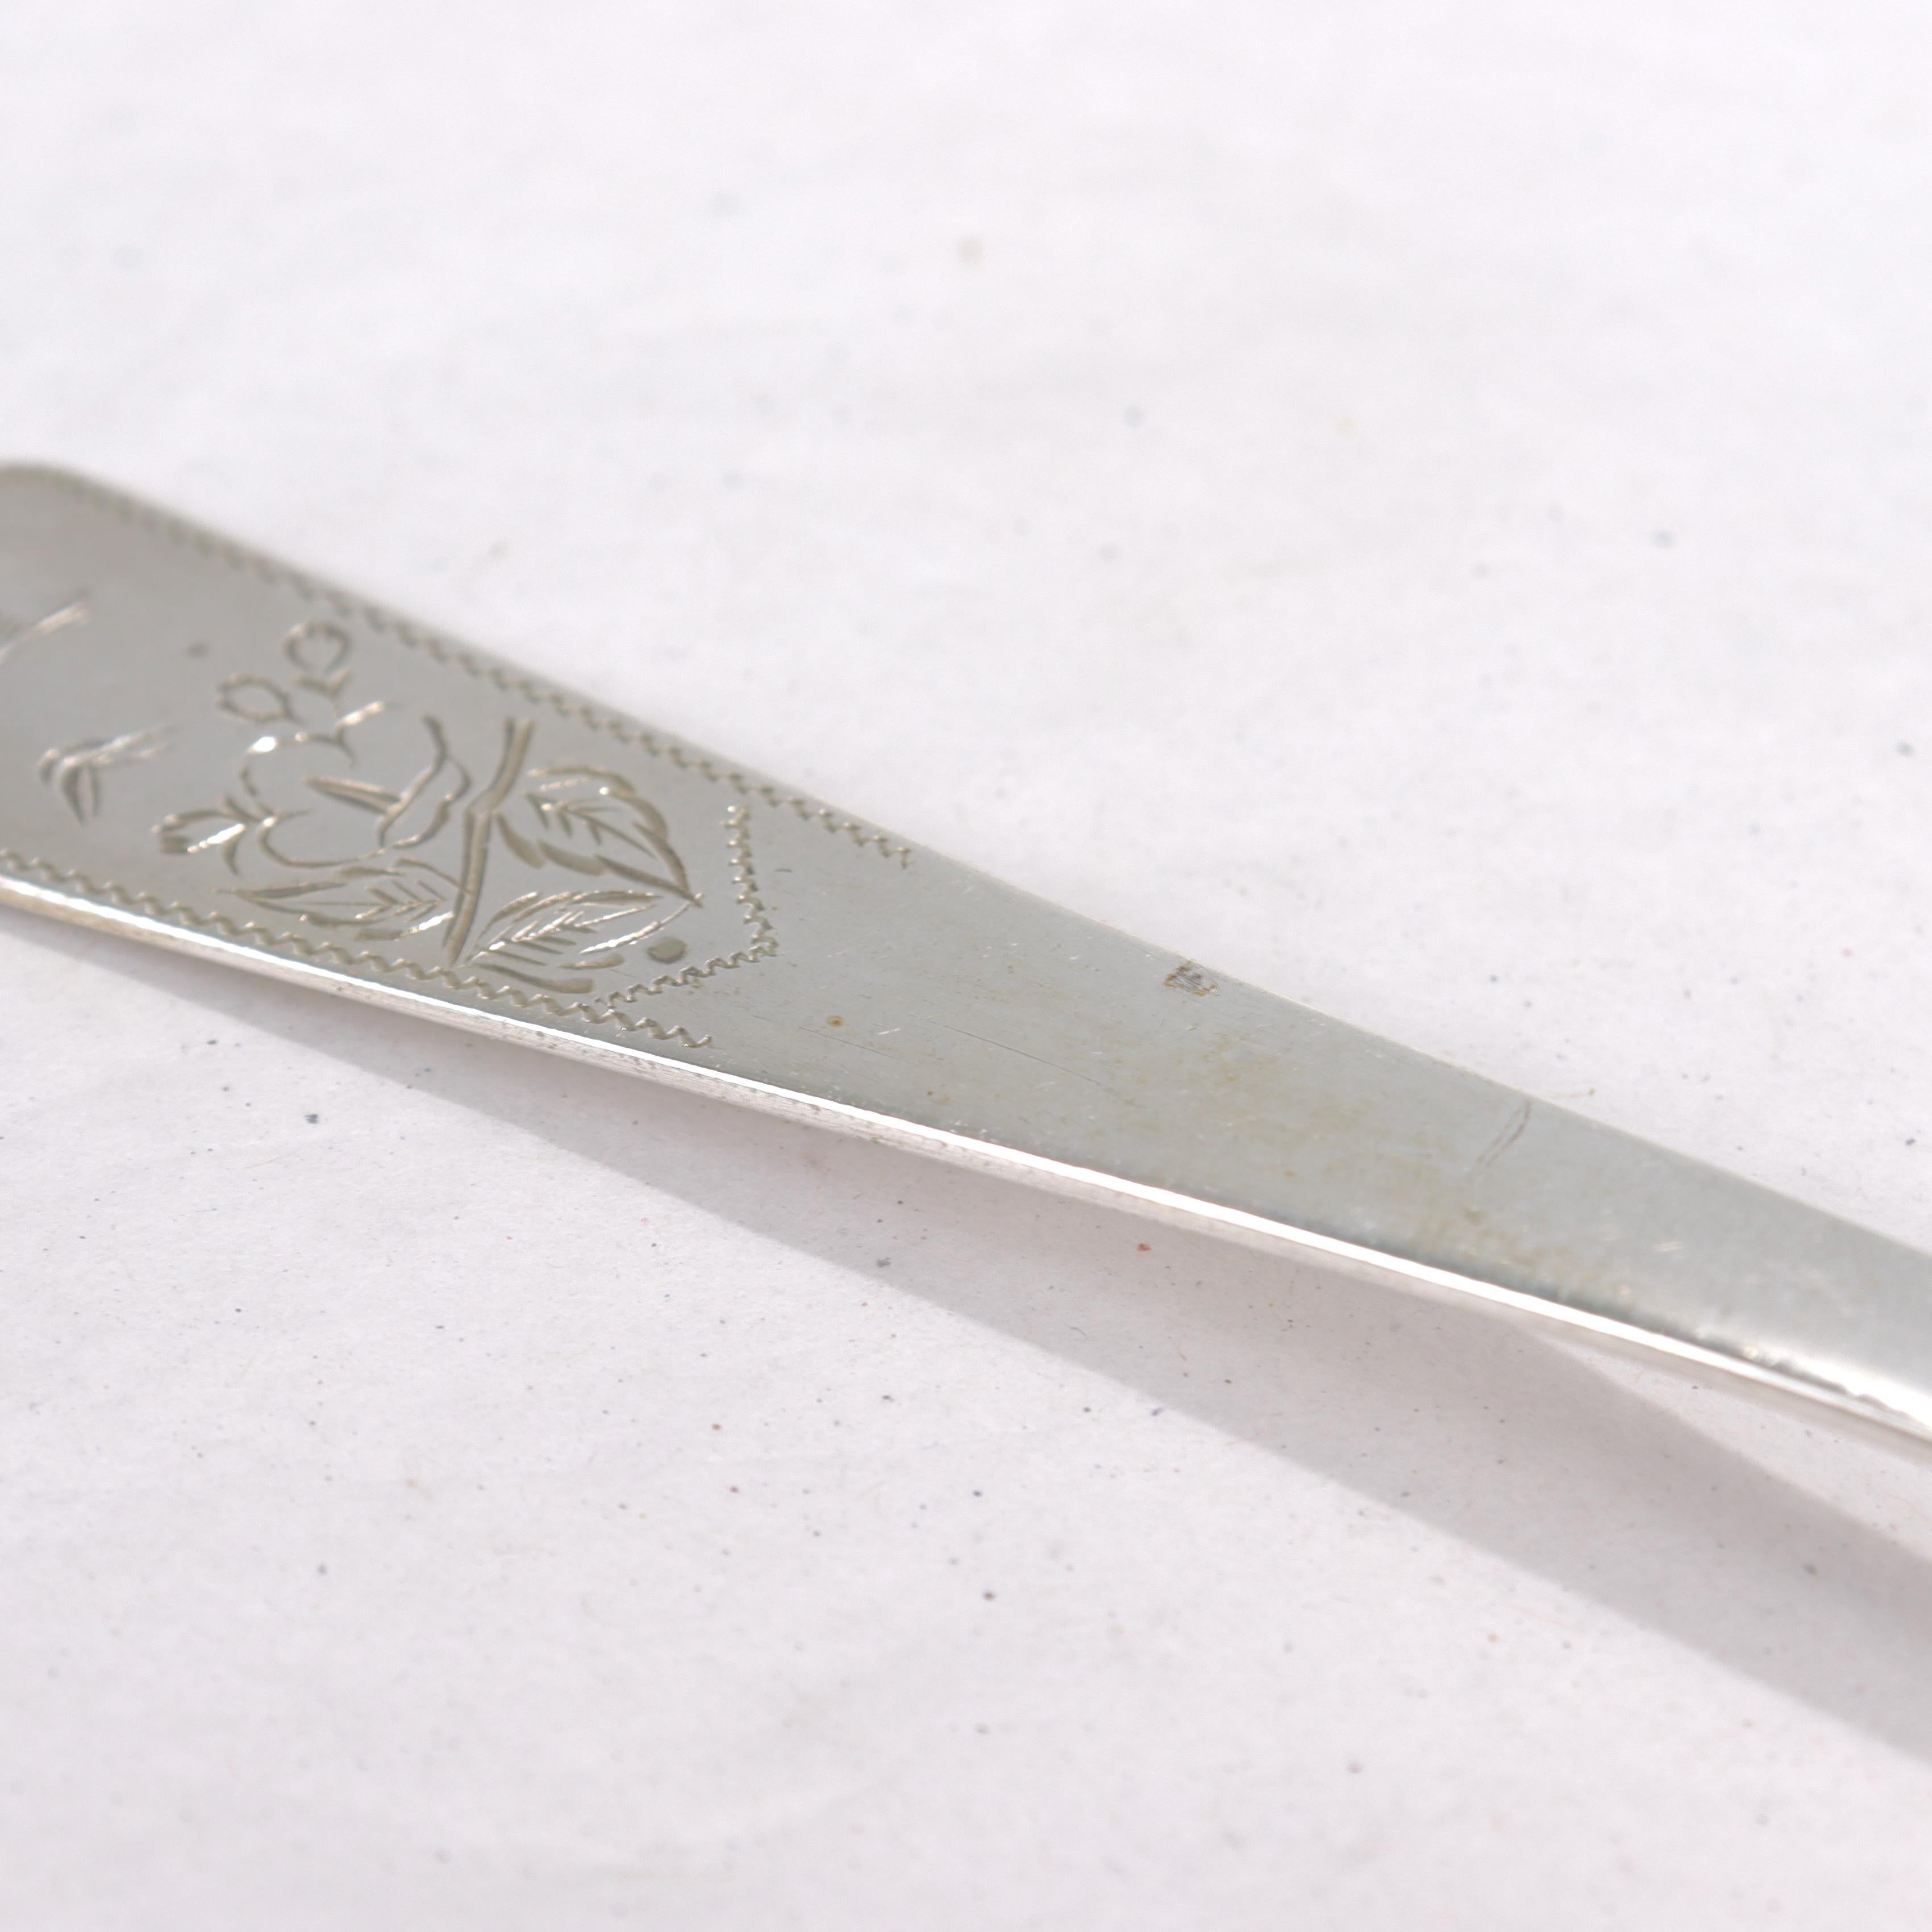 Old or Antique Chinese Export Silver Fork & Spoon For Sale 9